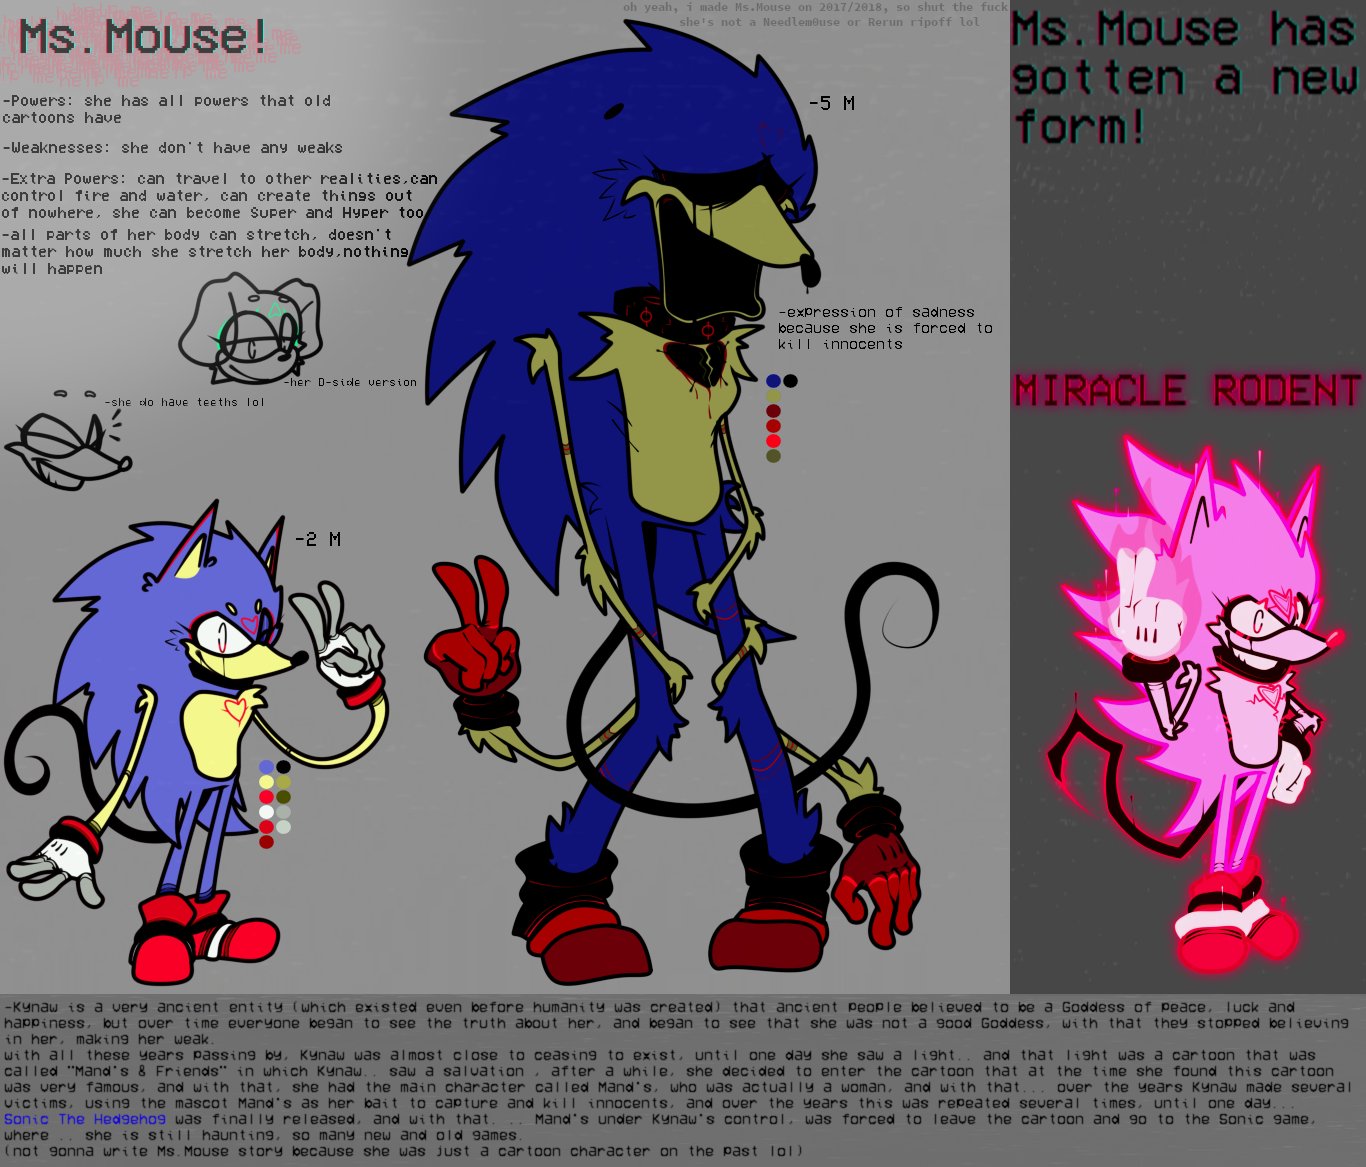 I made these Sonic.exe D-Side cover concepts to post on the Death